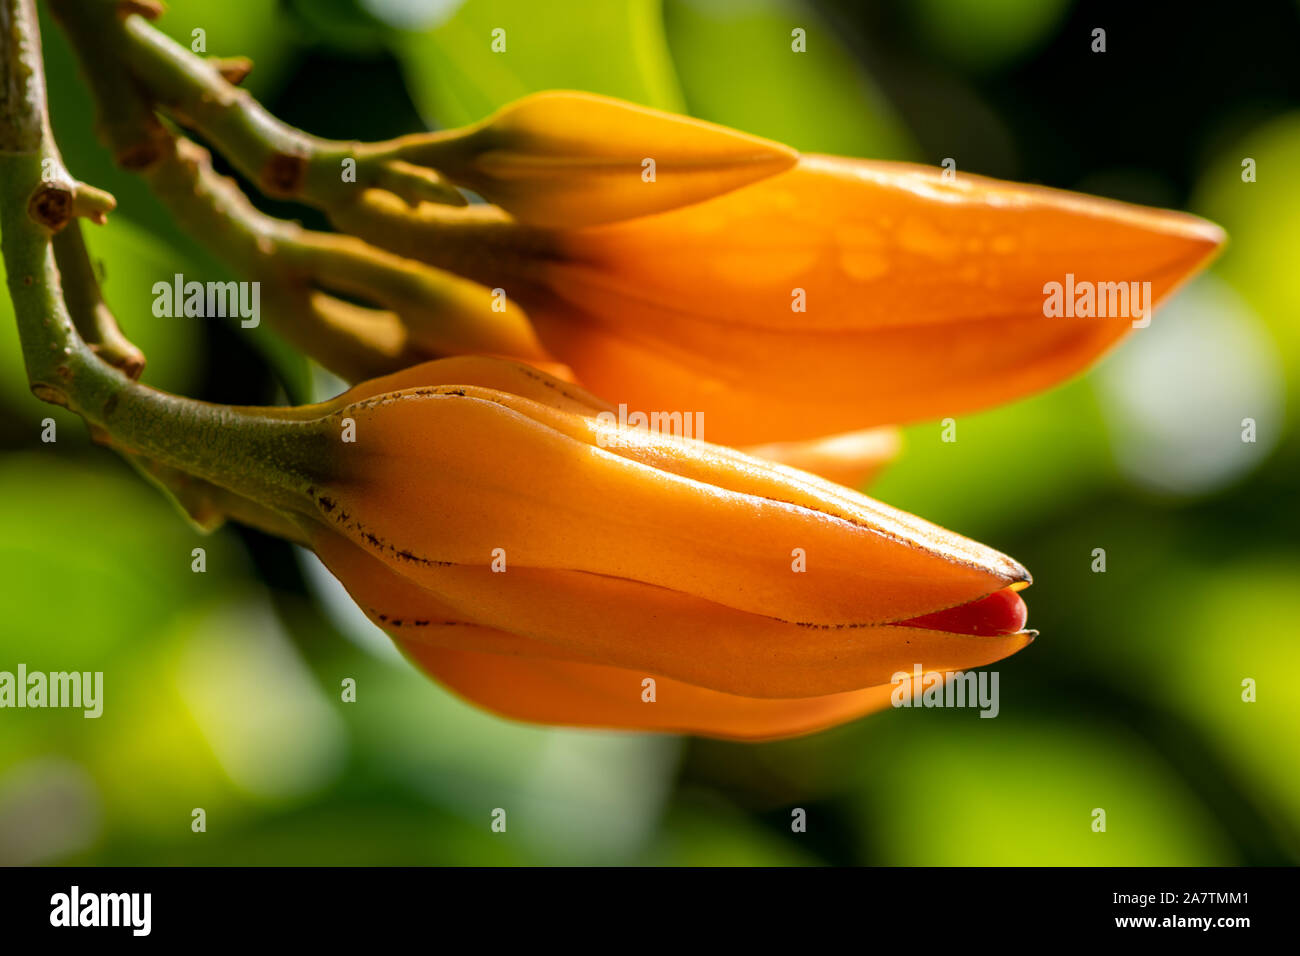 Yellow orange flower tree pods ready to bloom in Florida Stock Photo